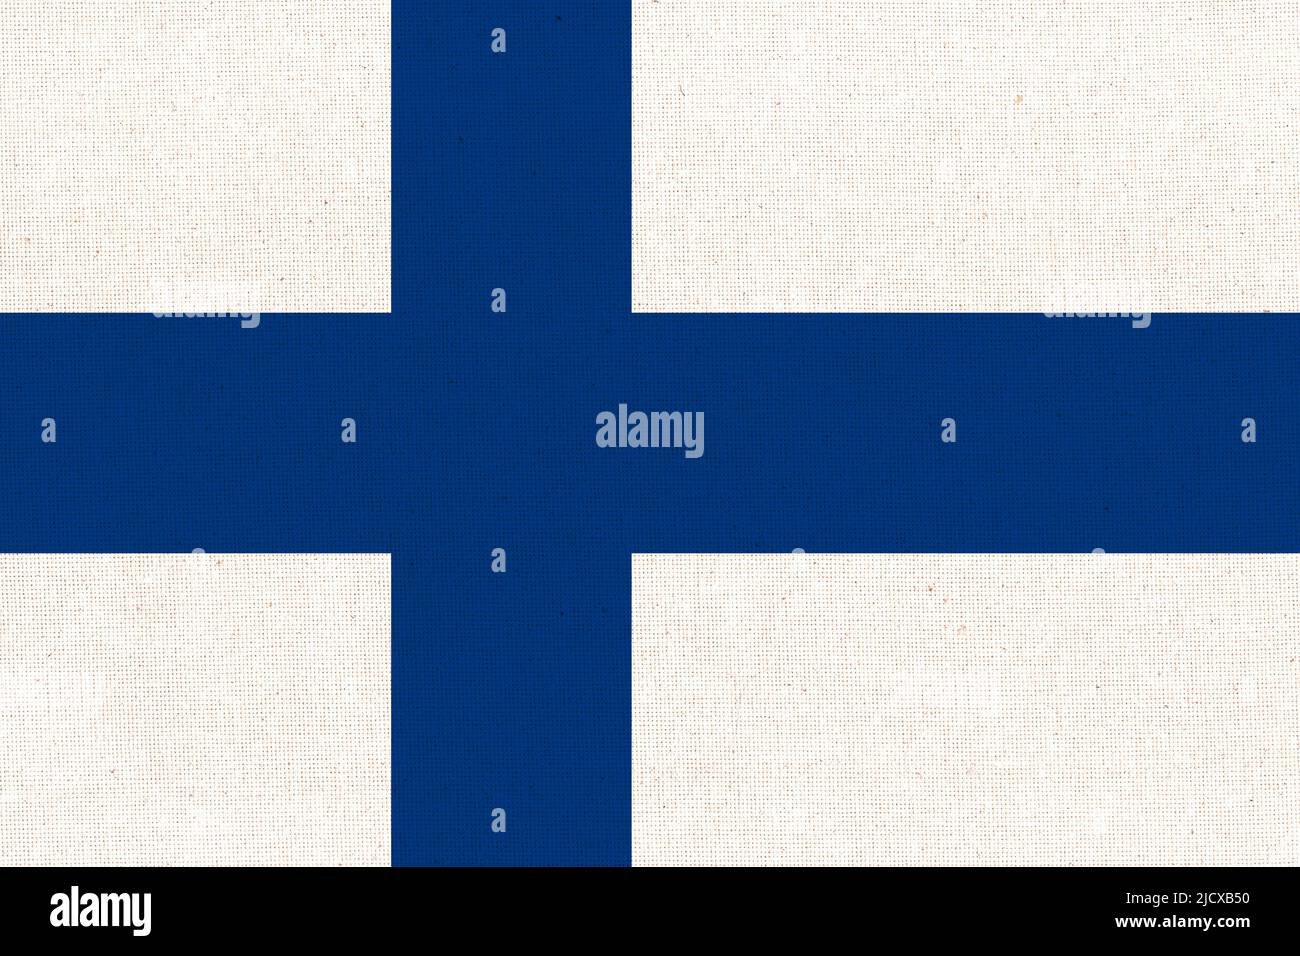 Flag of Finland. Finnish flag on fabric surface. Fabric texture. National symbol of Finland on patterned background. Scandinavian country Stock Photo